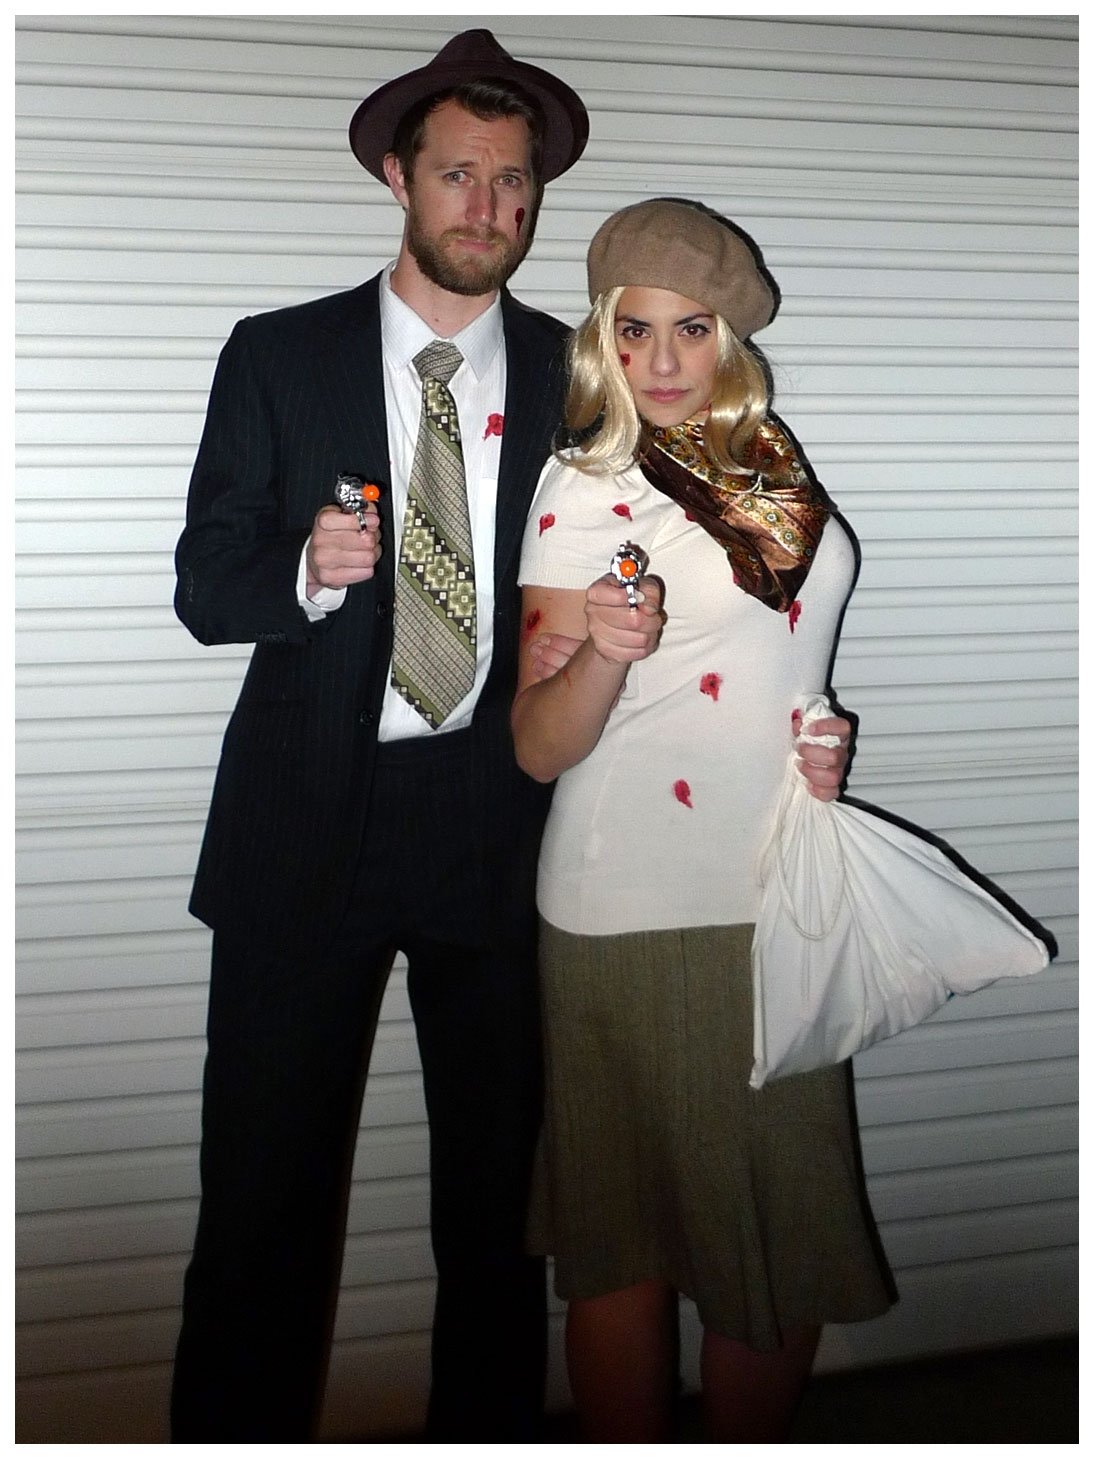 10 Most Recommended Bonnie And Clyde Costume Ideas 2020